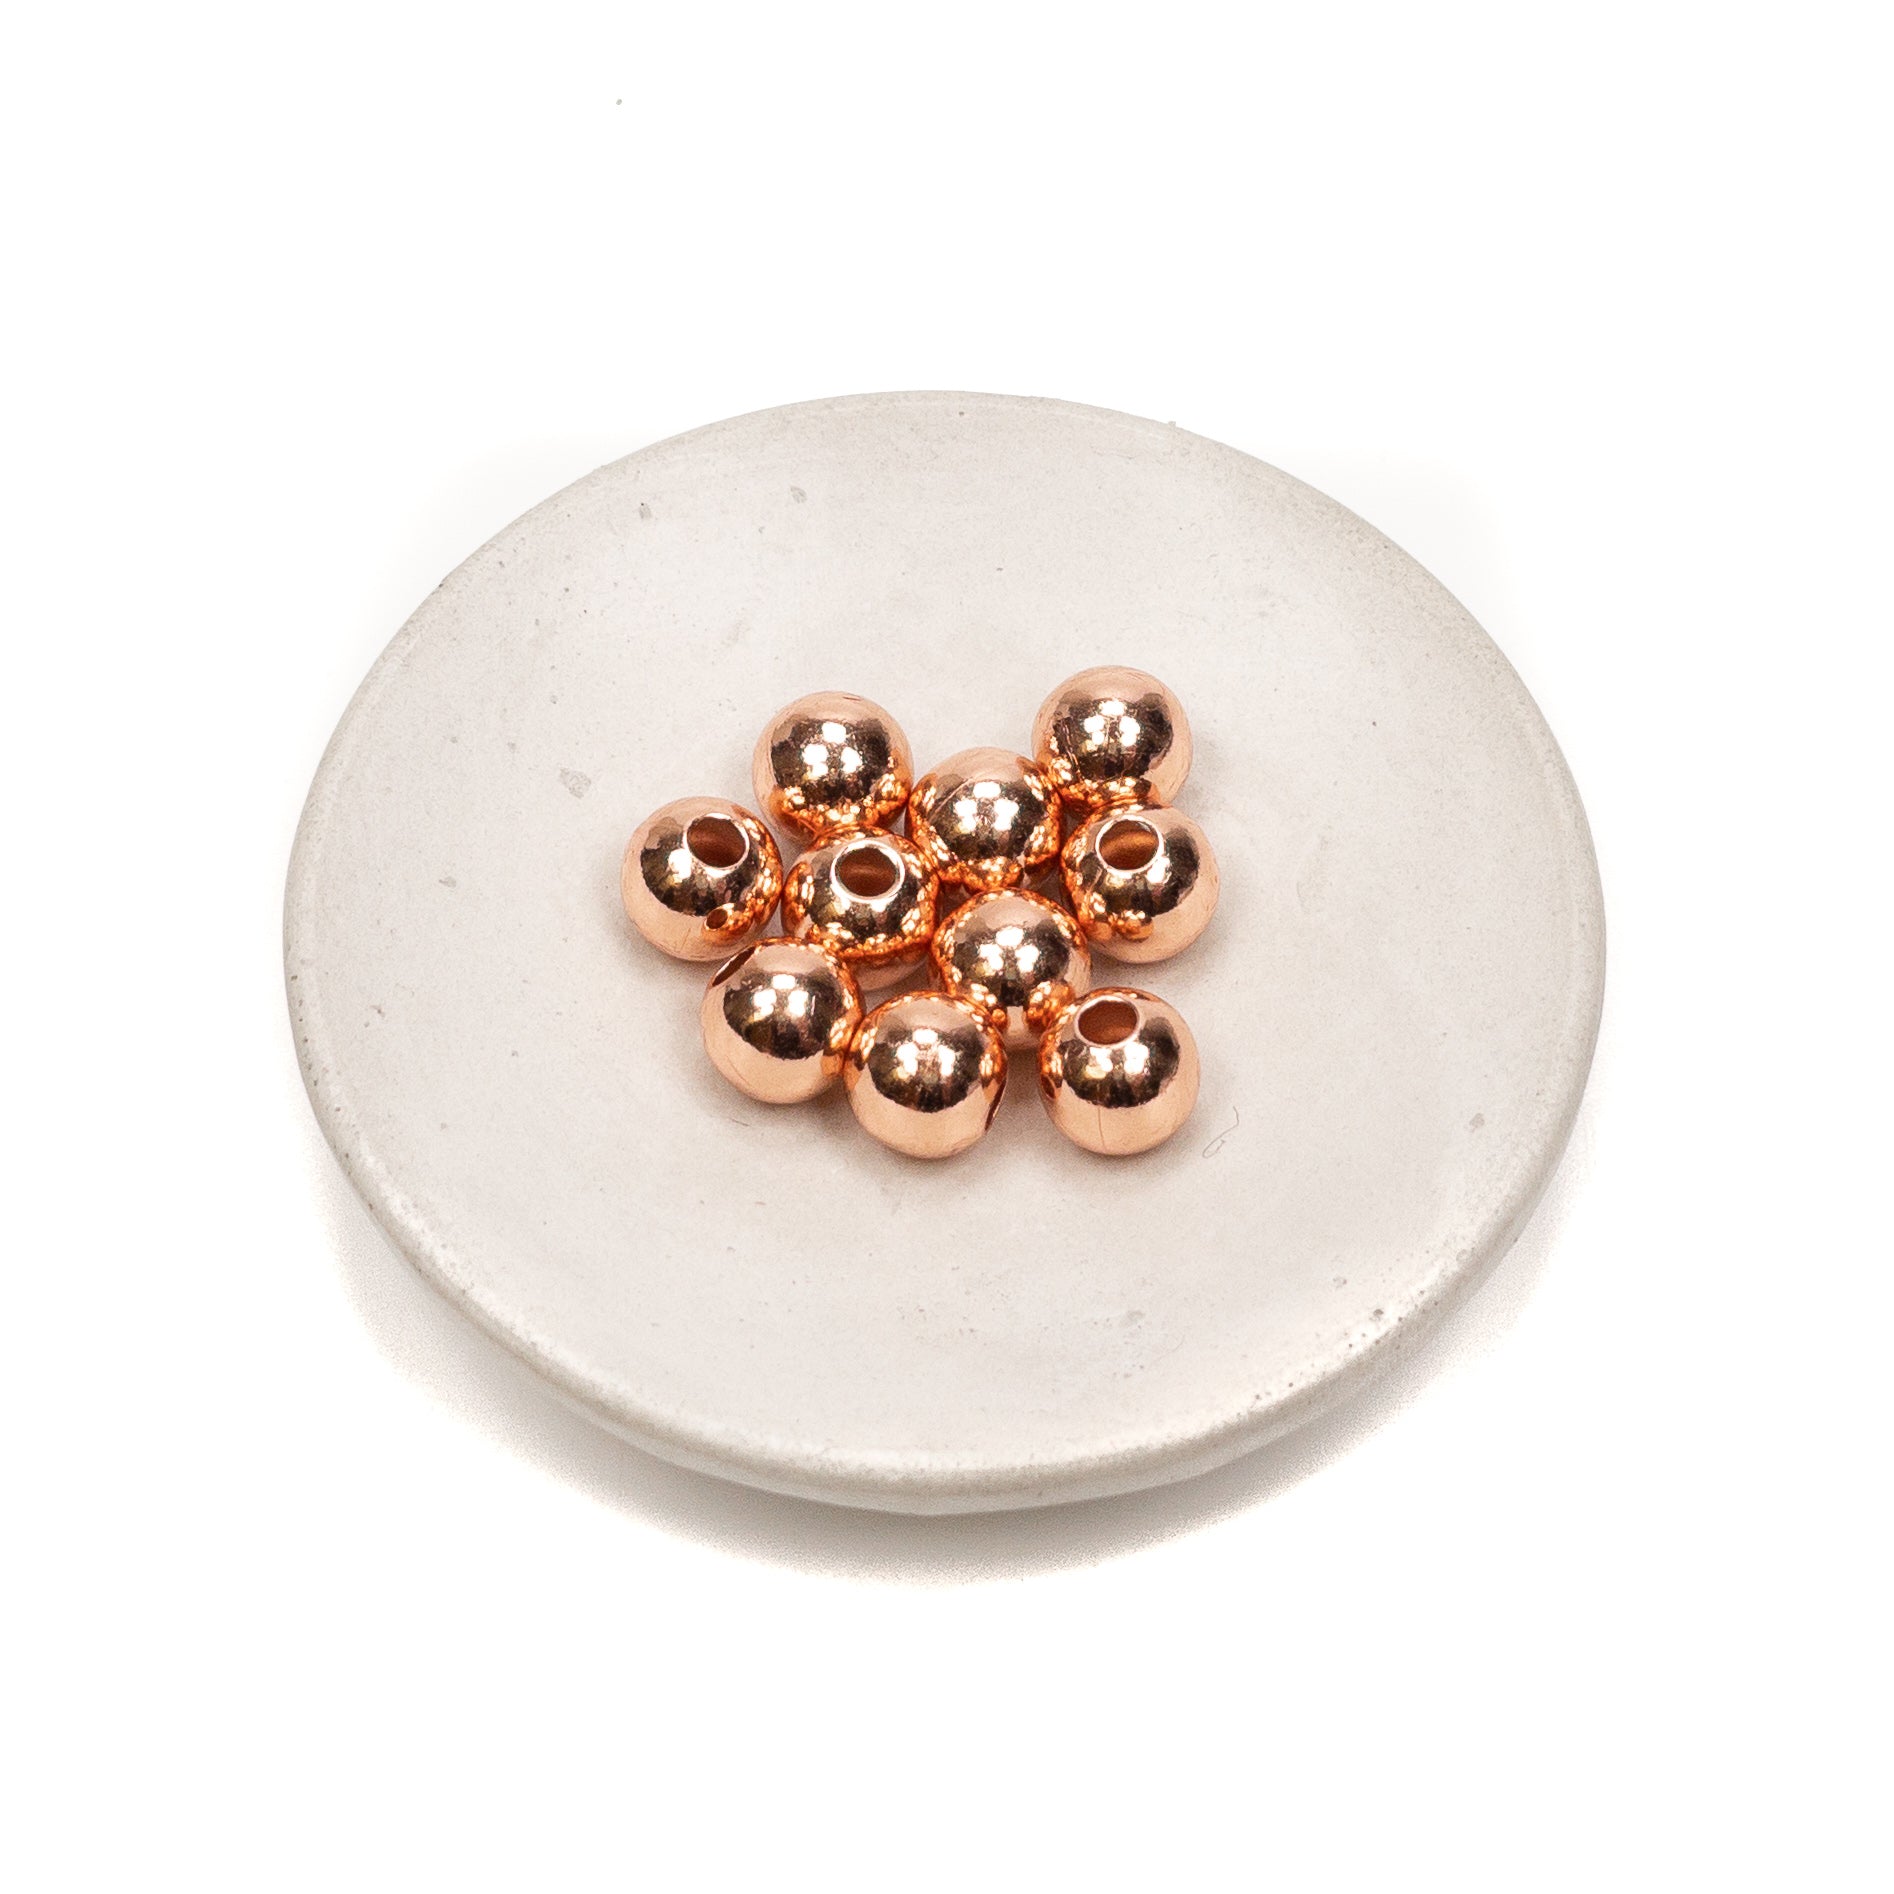 8mm Smooth Round Bead (Copper) - 10 pcs.